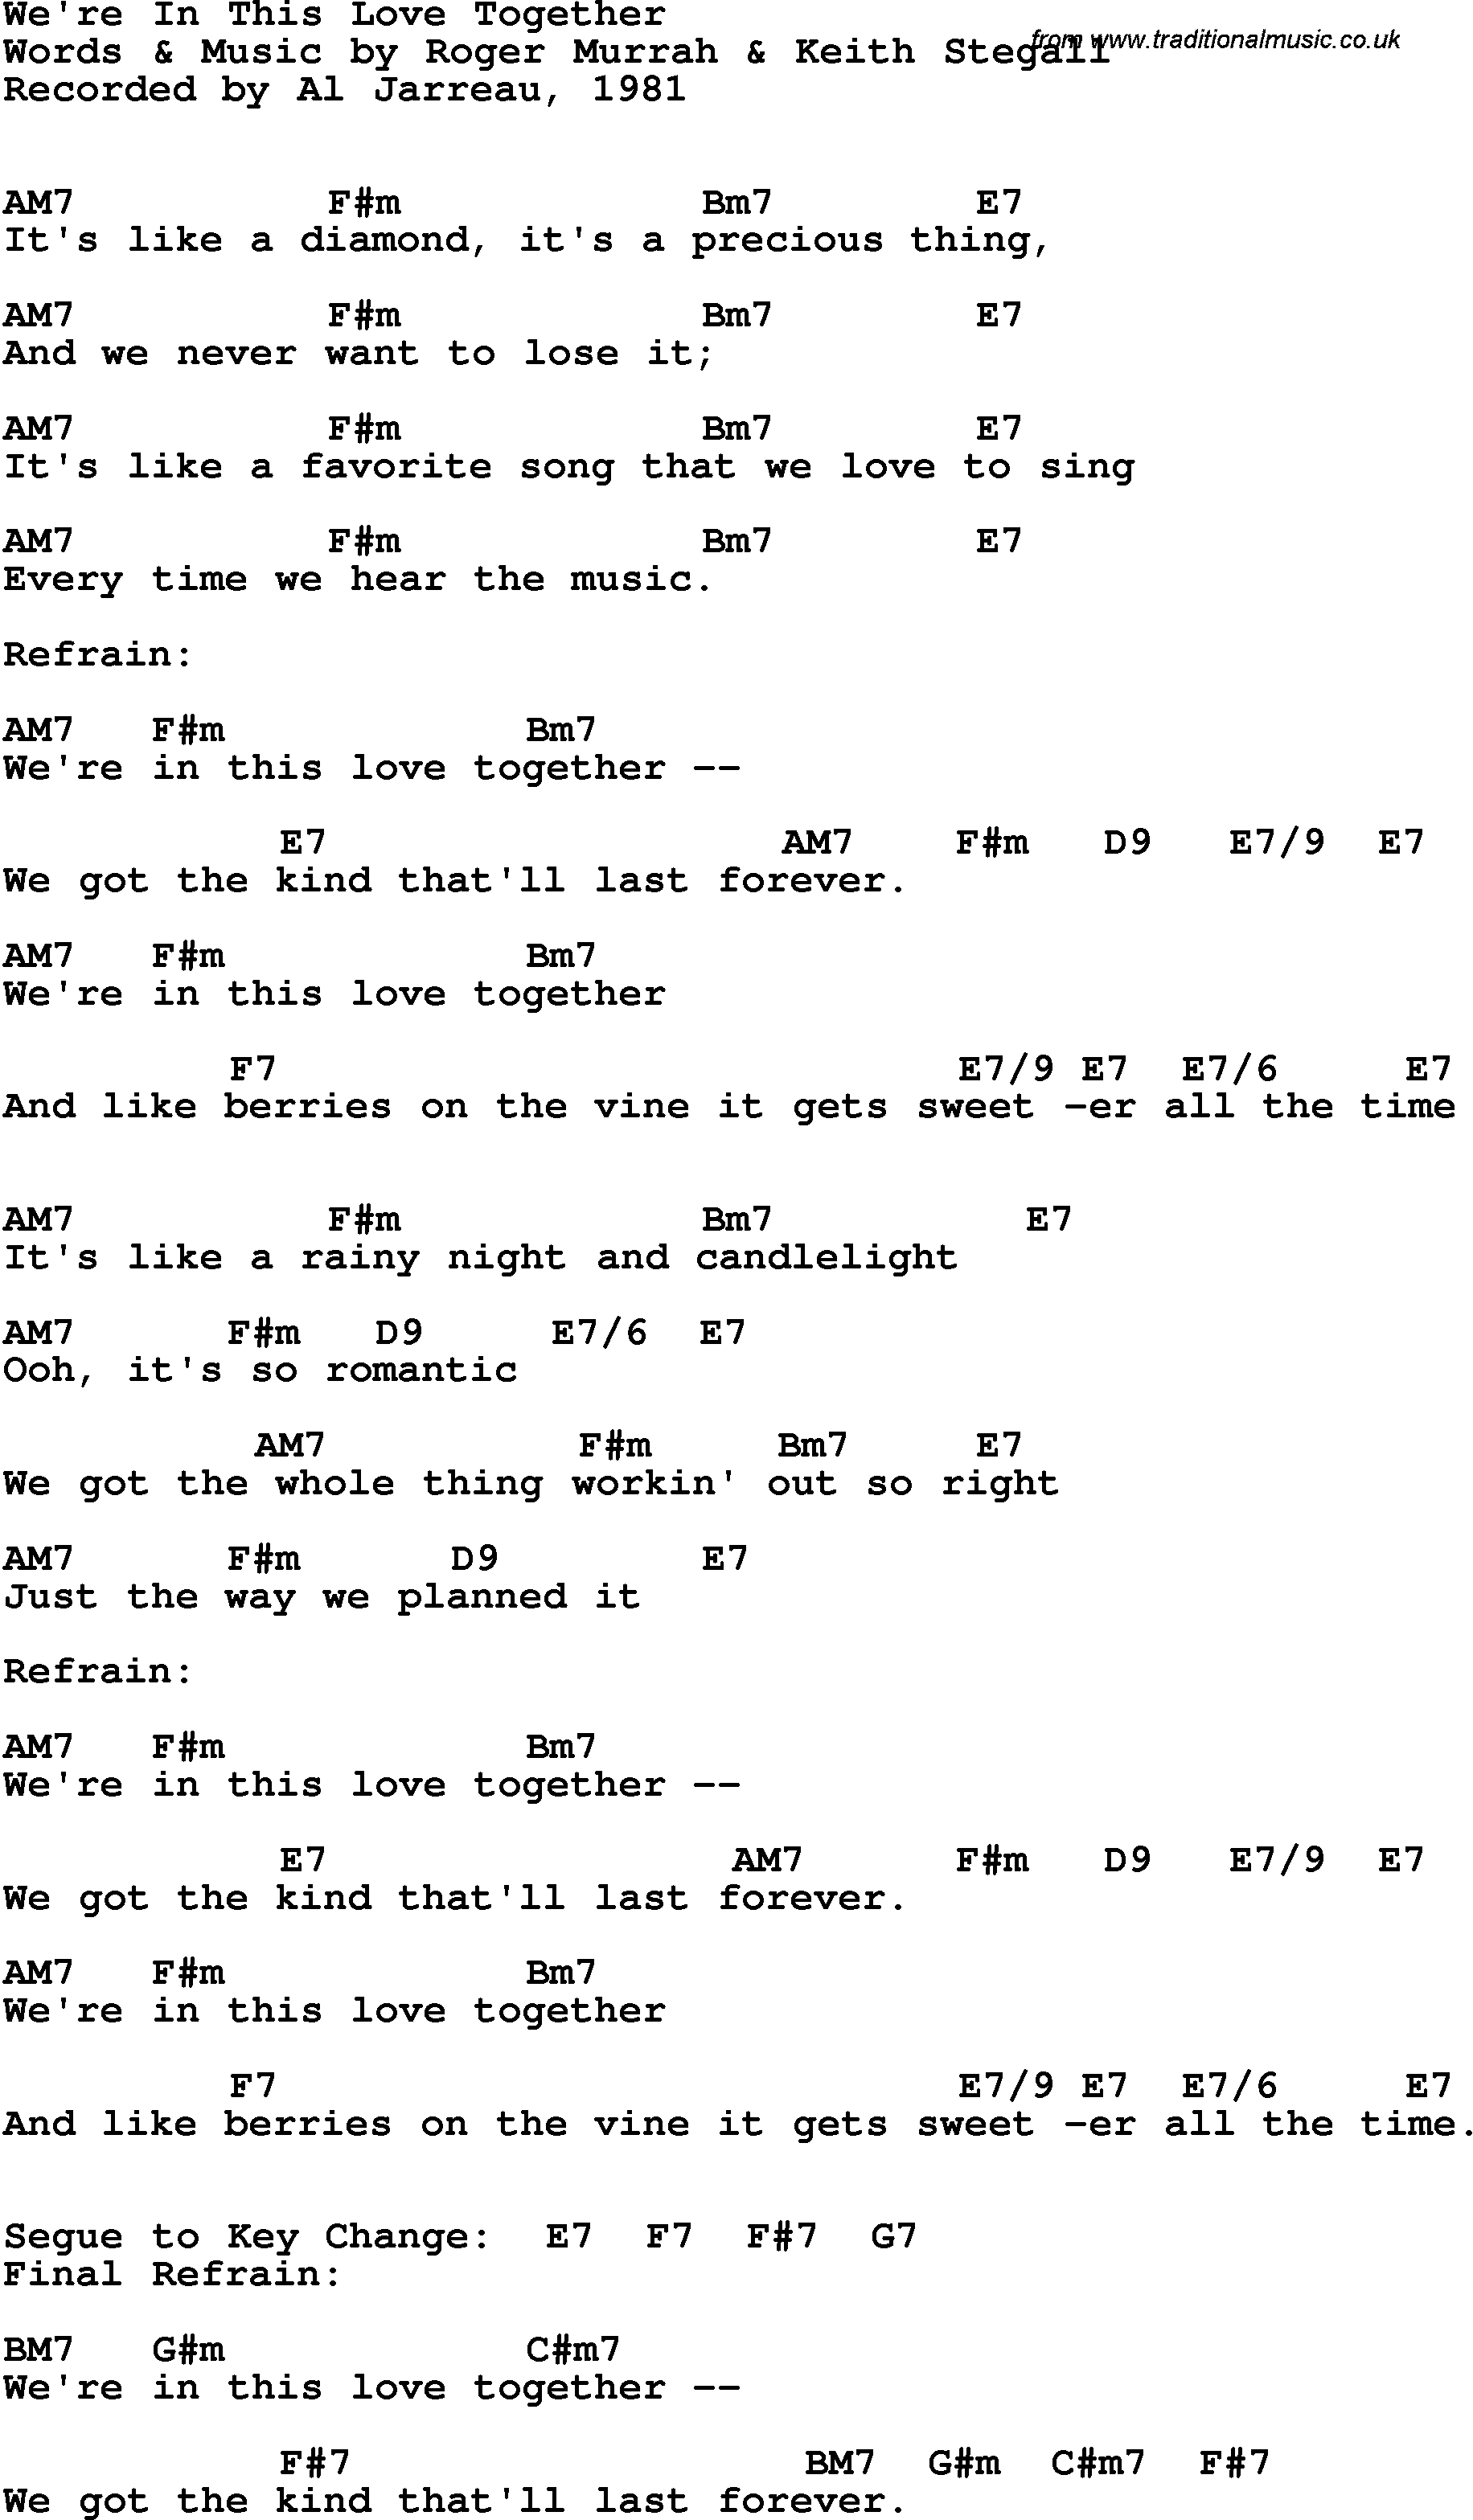 Song Lyrics with guitar chords for We're In This Love Together - Al Jarreau, 1981